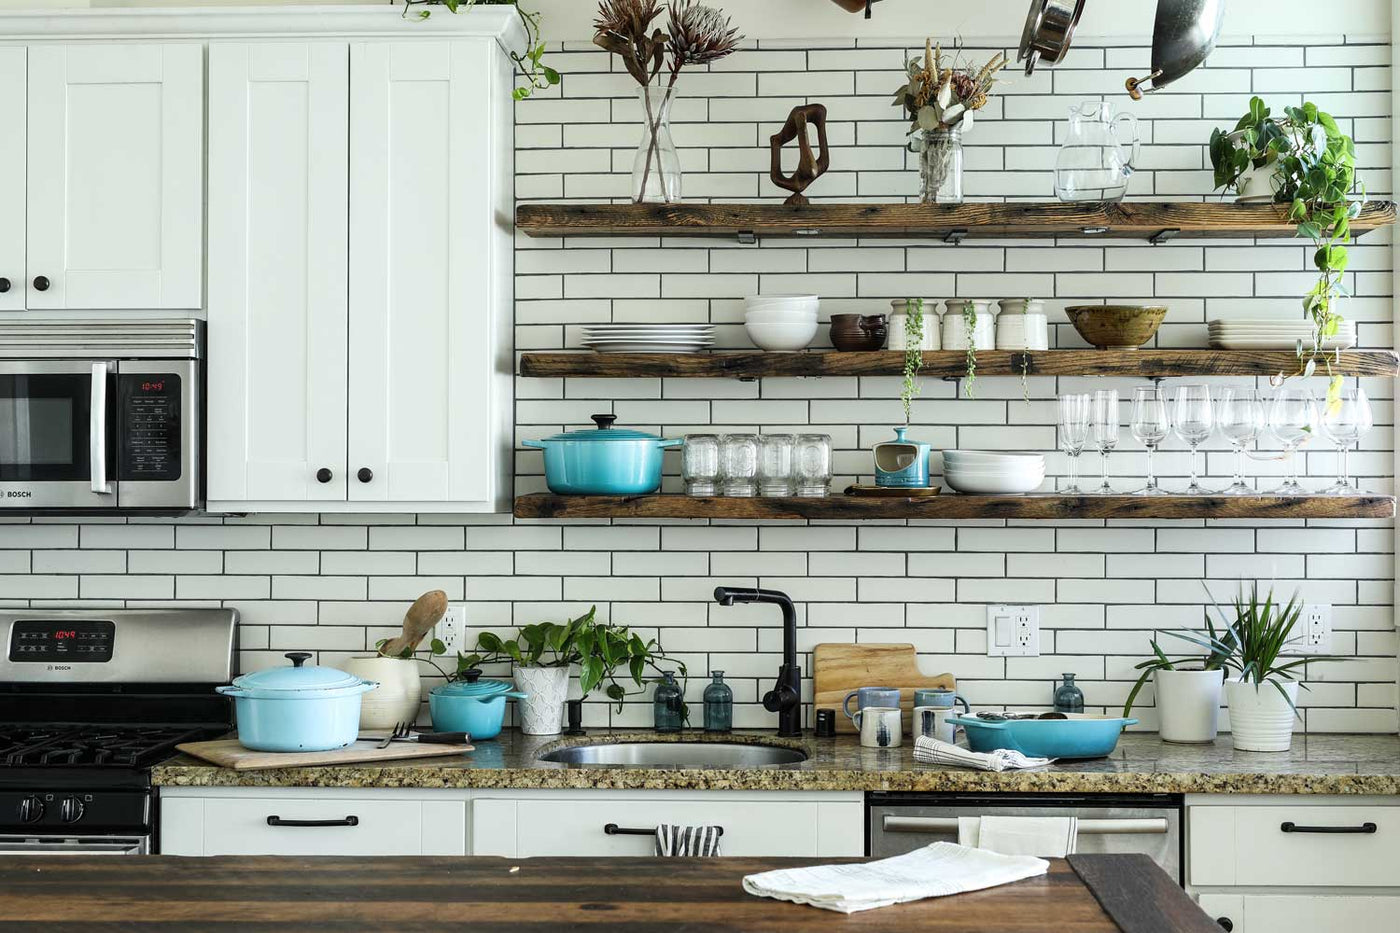 7 Questions to ask before choosing open shelving in a kitchen